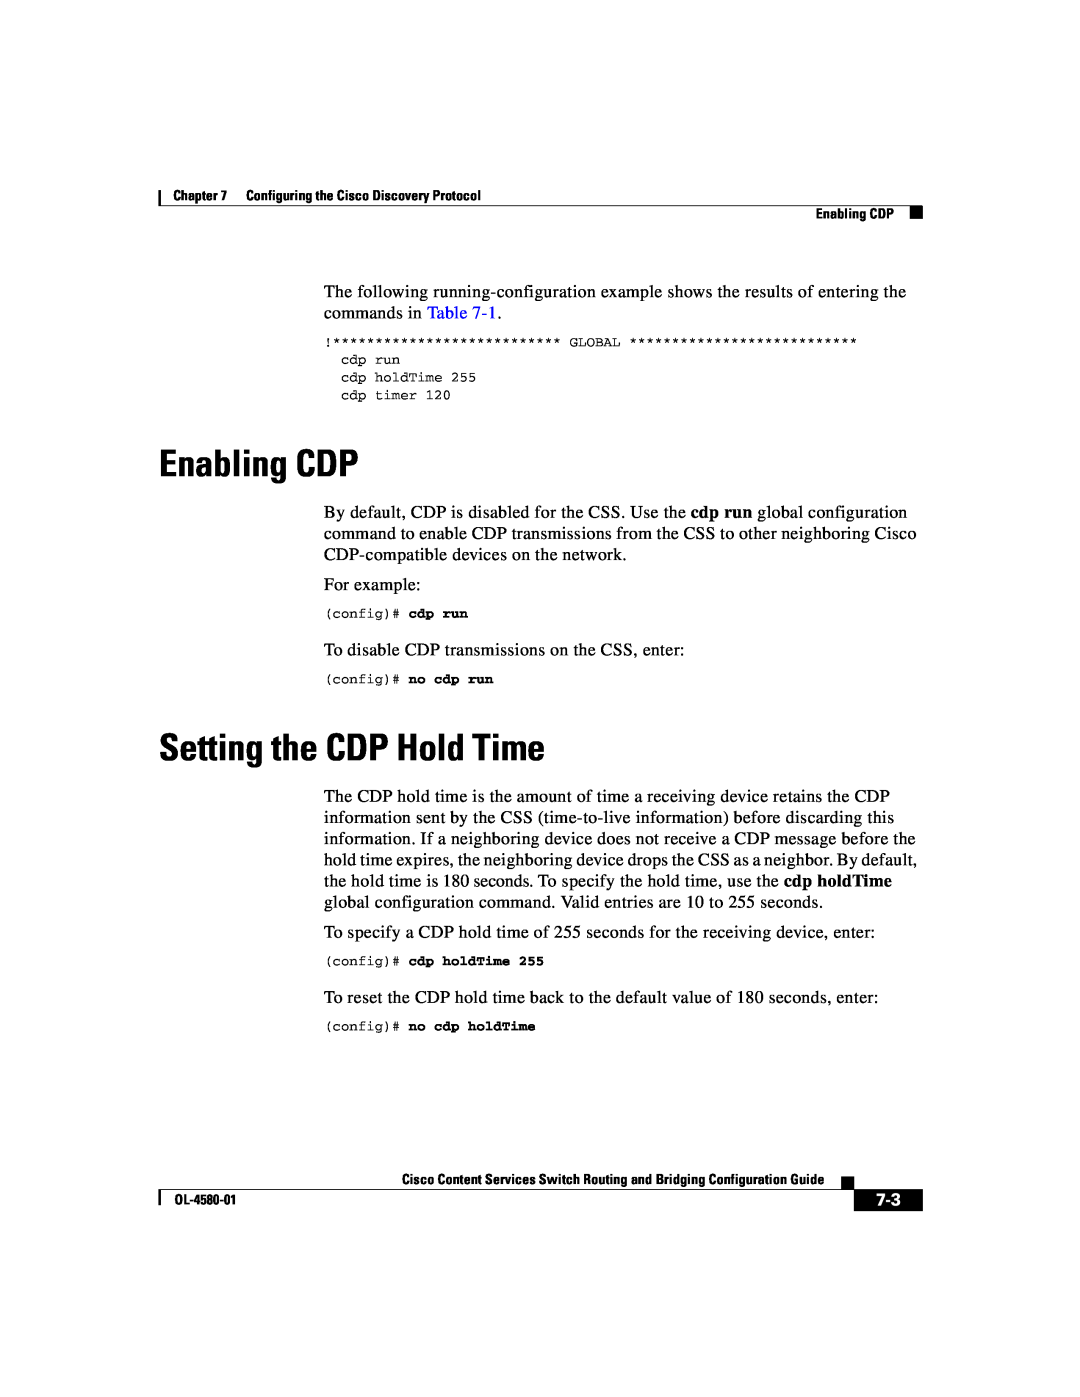 Cisco Systems OL-4580-01 manual Enabling CDP, Setting the CDP Hold Time, cdp holdTime 255 cdp timer 